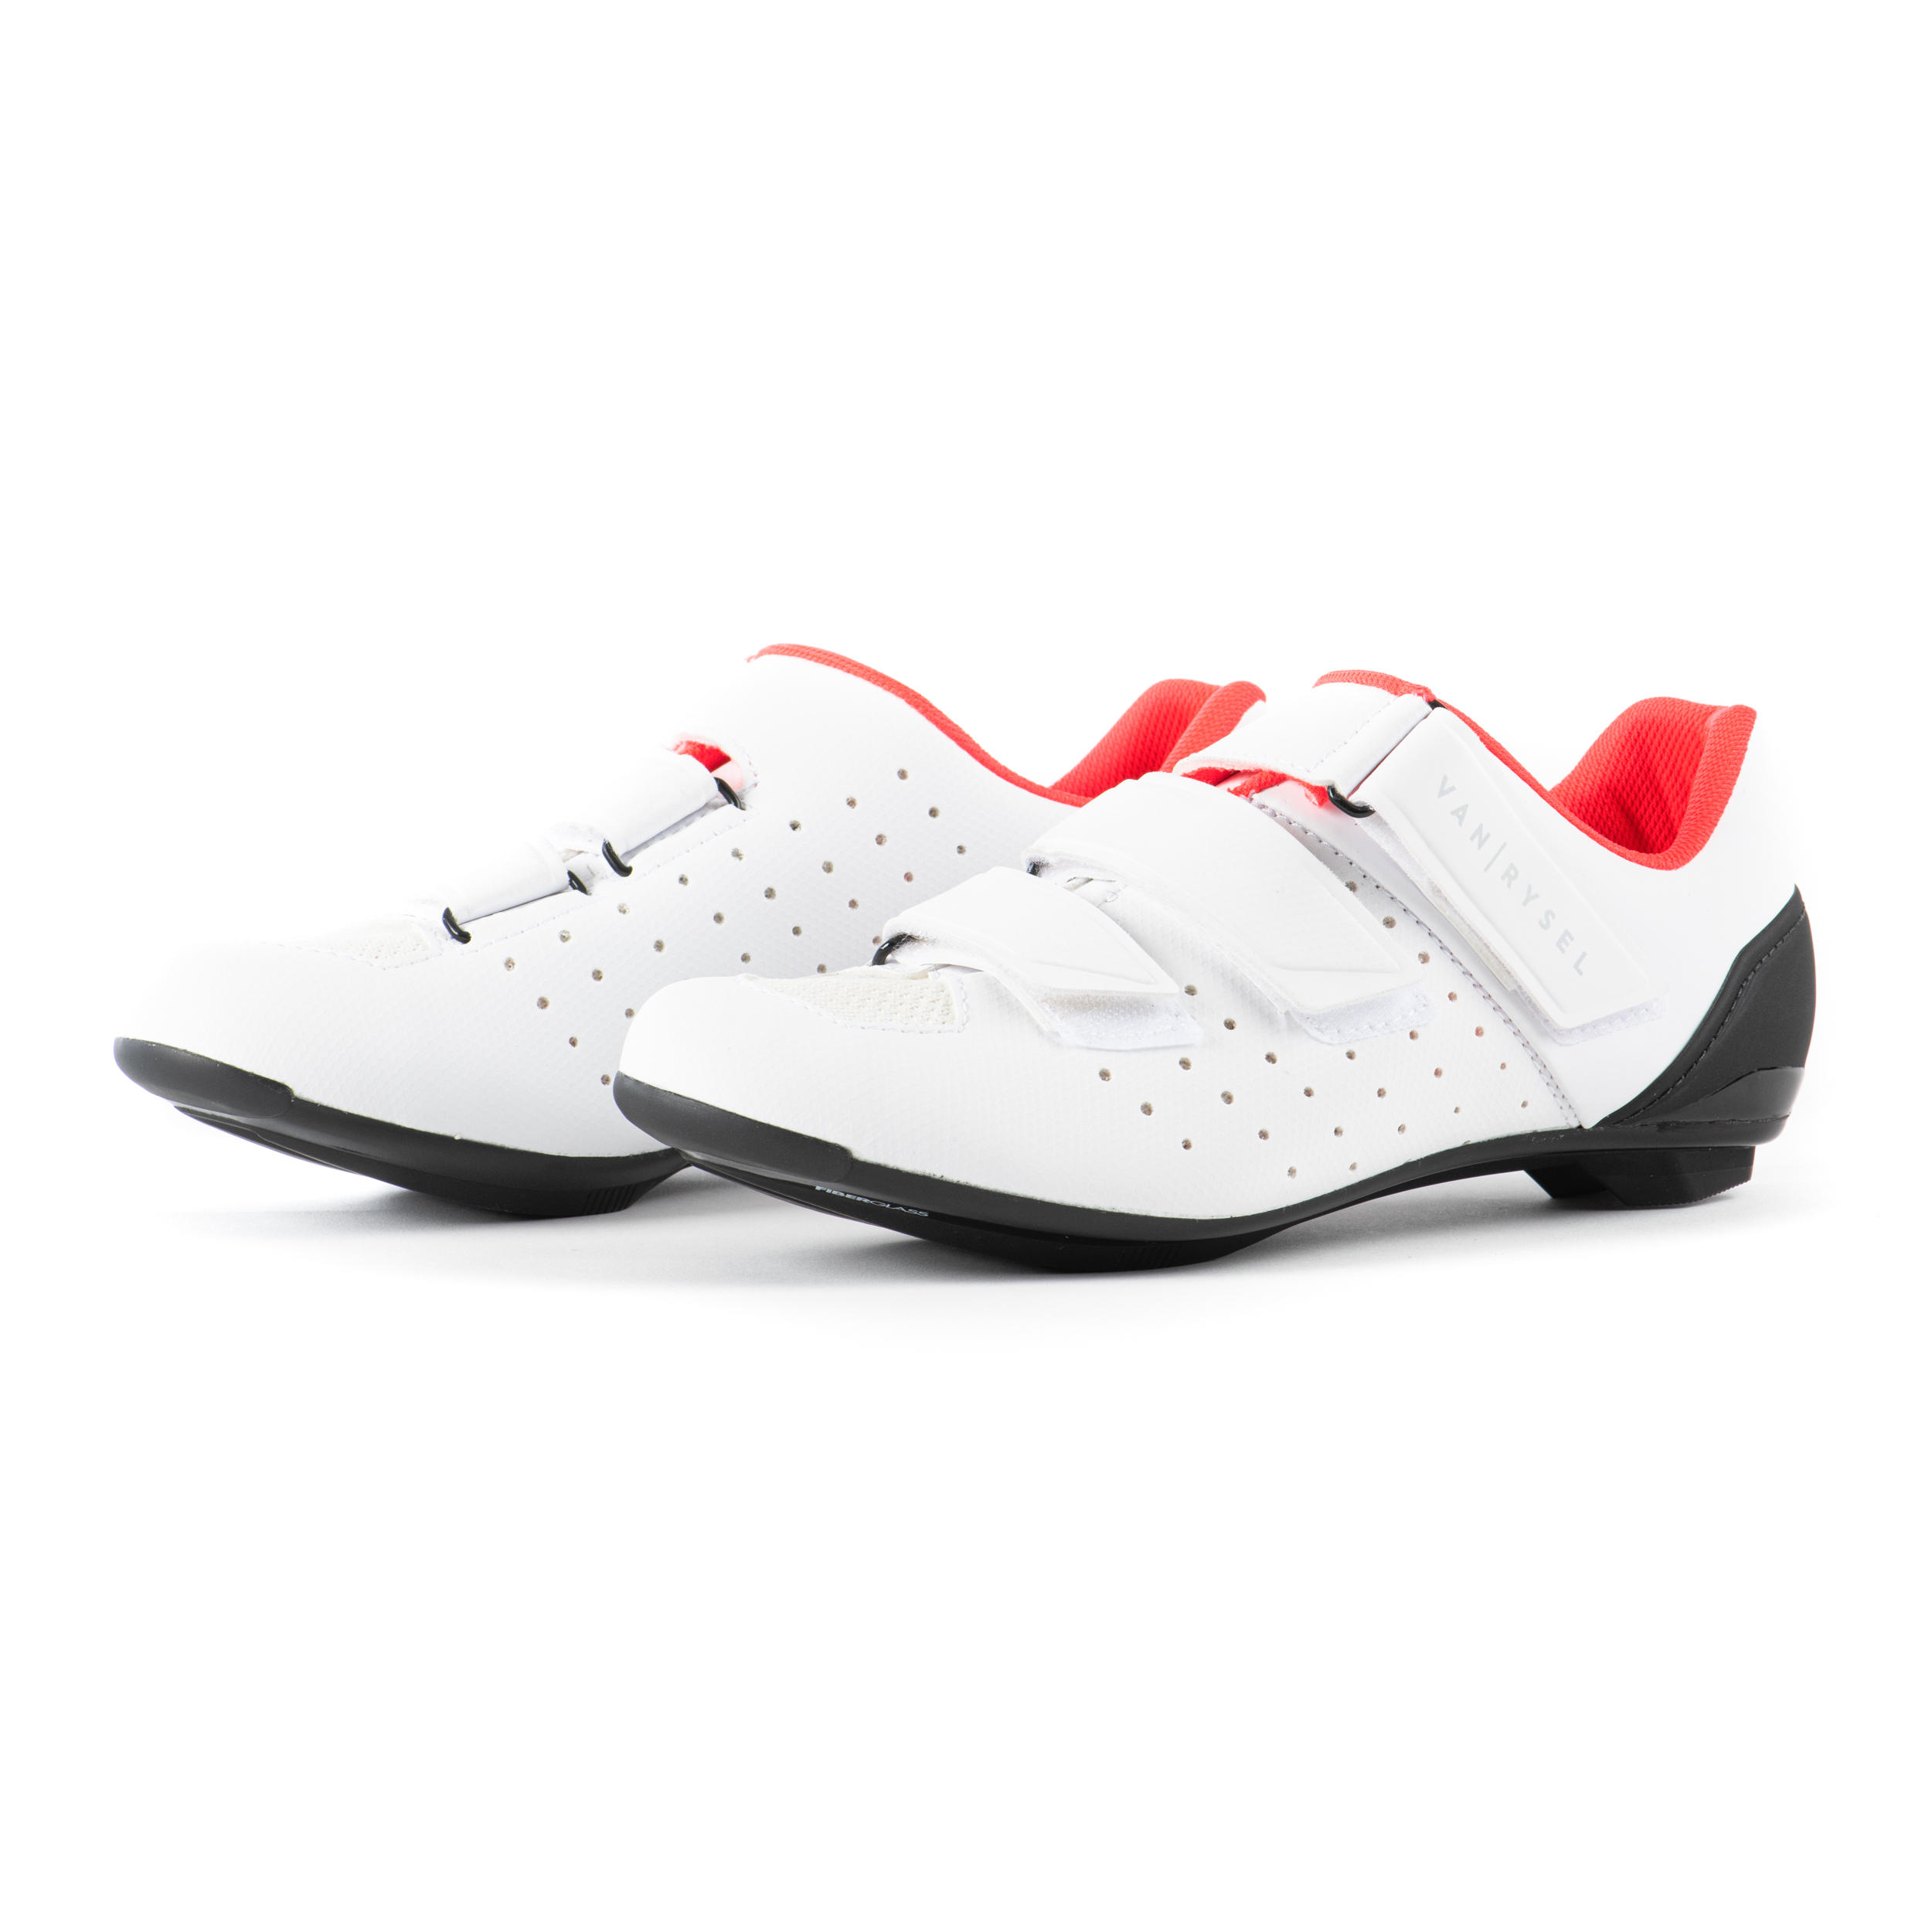 RoadR 500 Sportive Road Cycling Shoes 